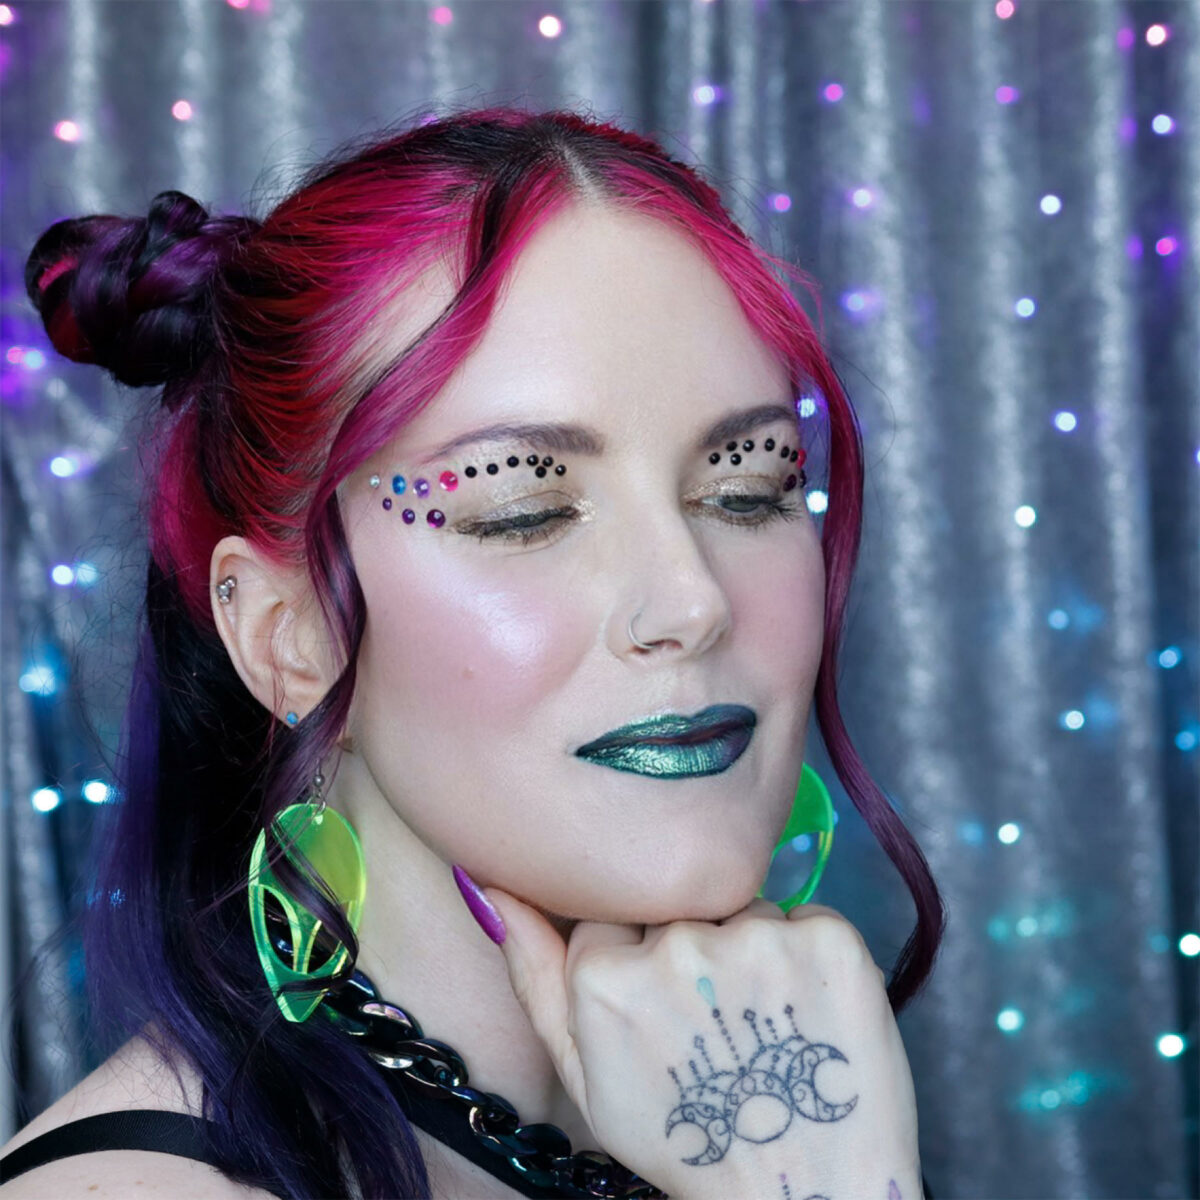 Festival Makeup with face gems and glitter